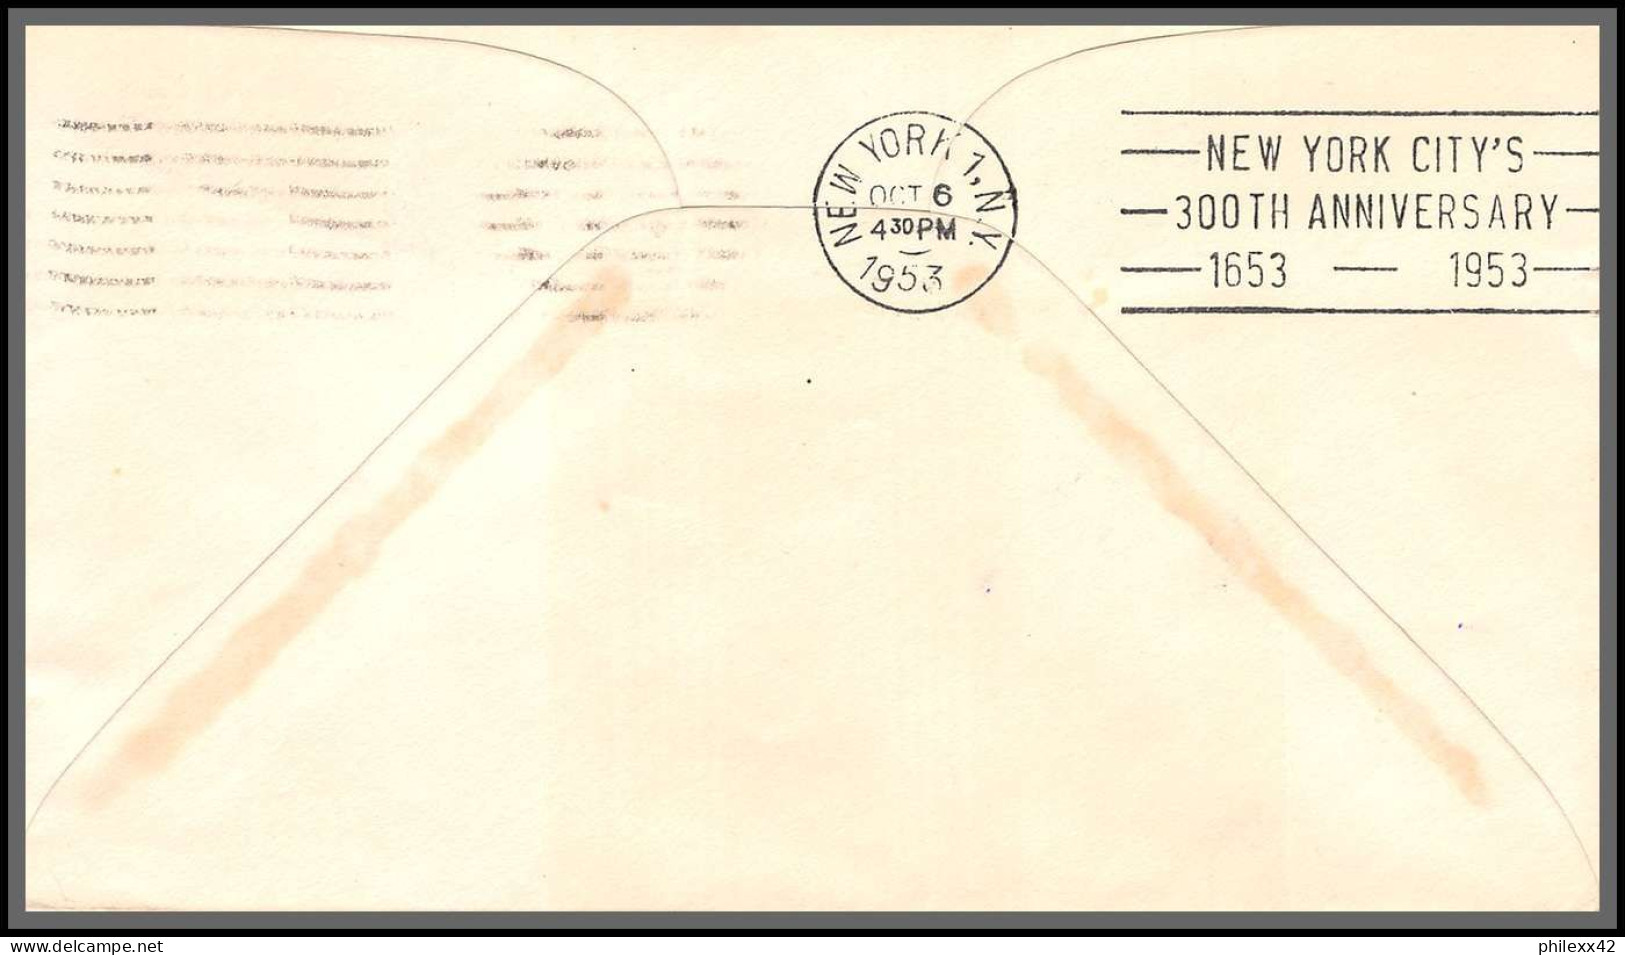 12264 Twa United Washington New York Chicago 6/10/1953 Premier Vol First Flight Regular Mail Lettre Airmail Cover Usa - 2c. 1941-1960 Covers